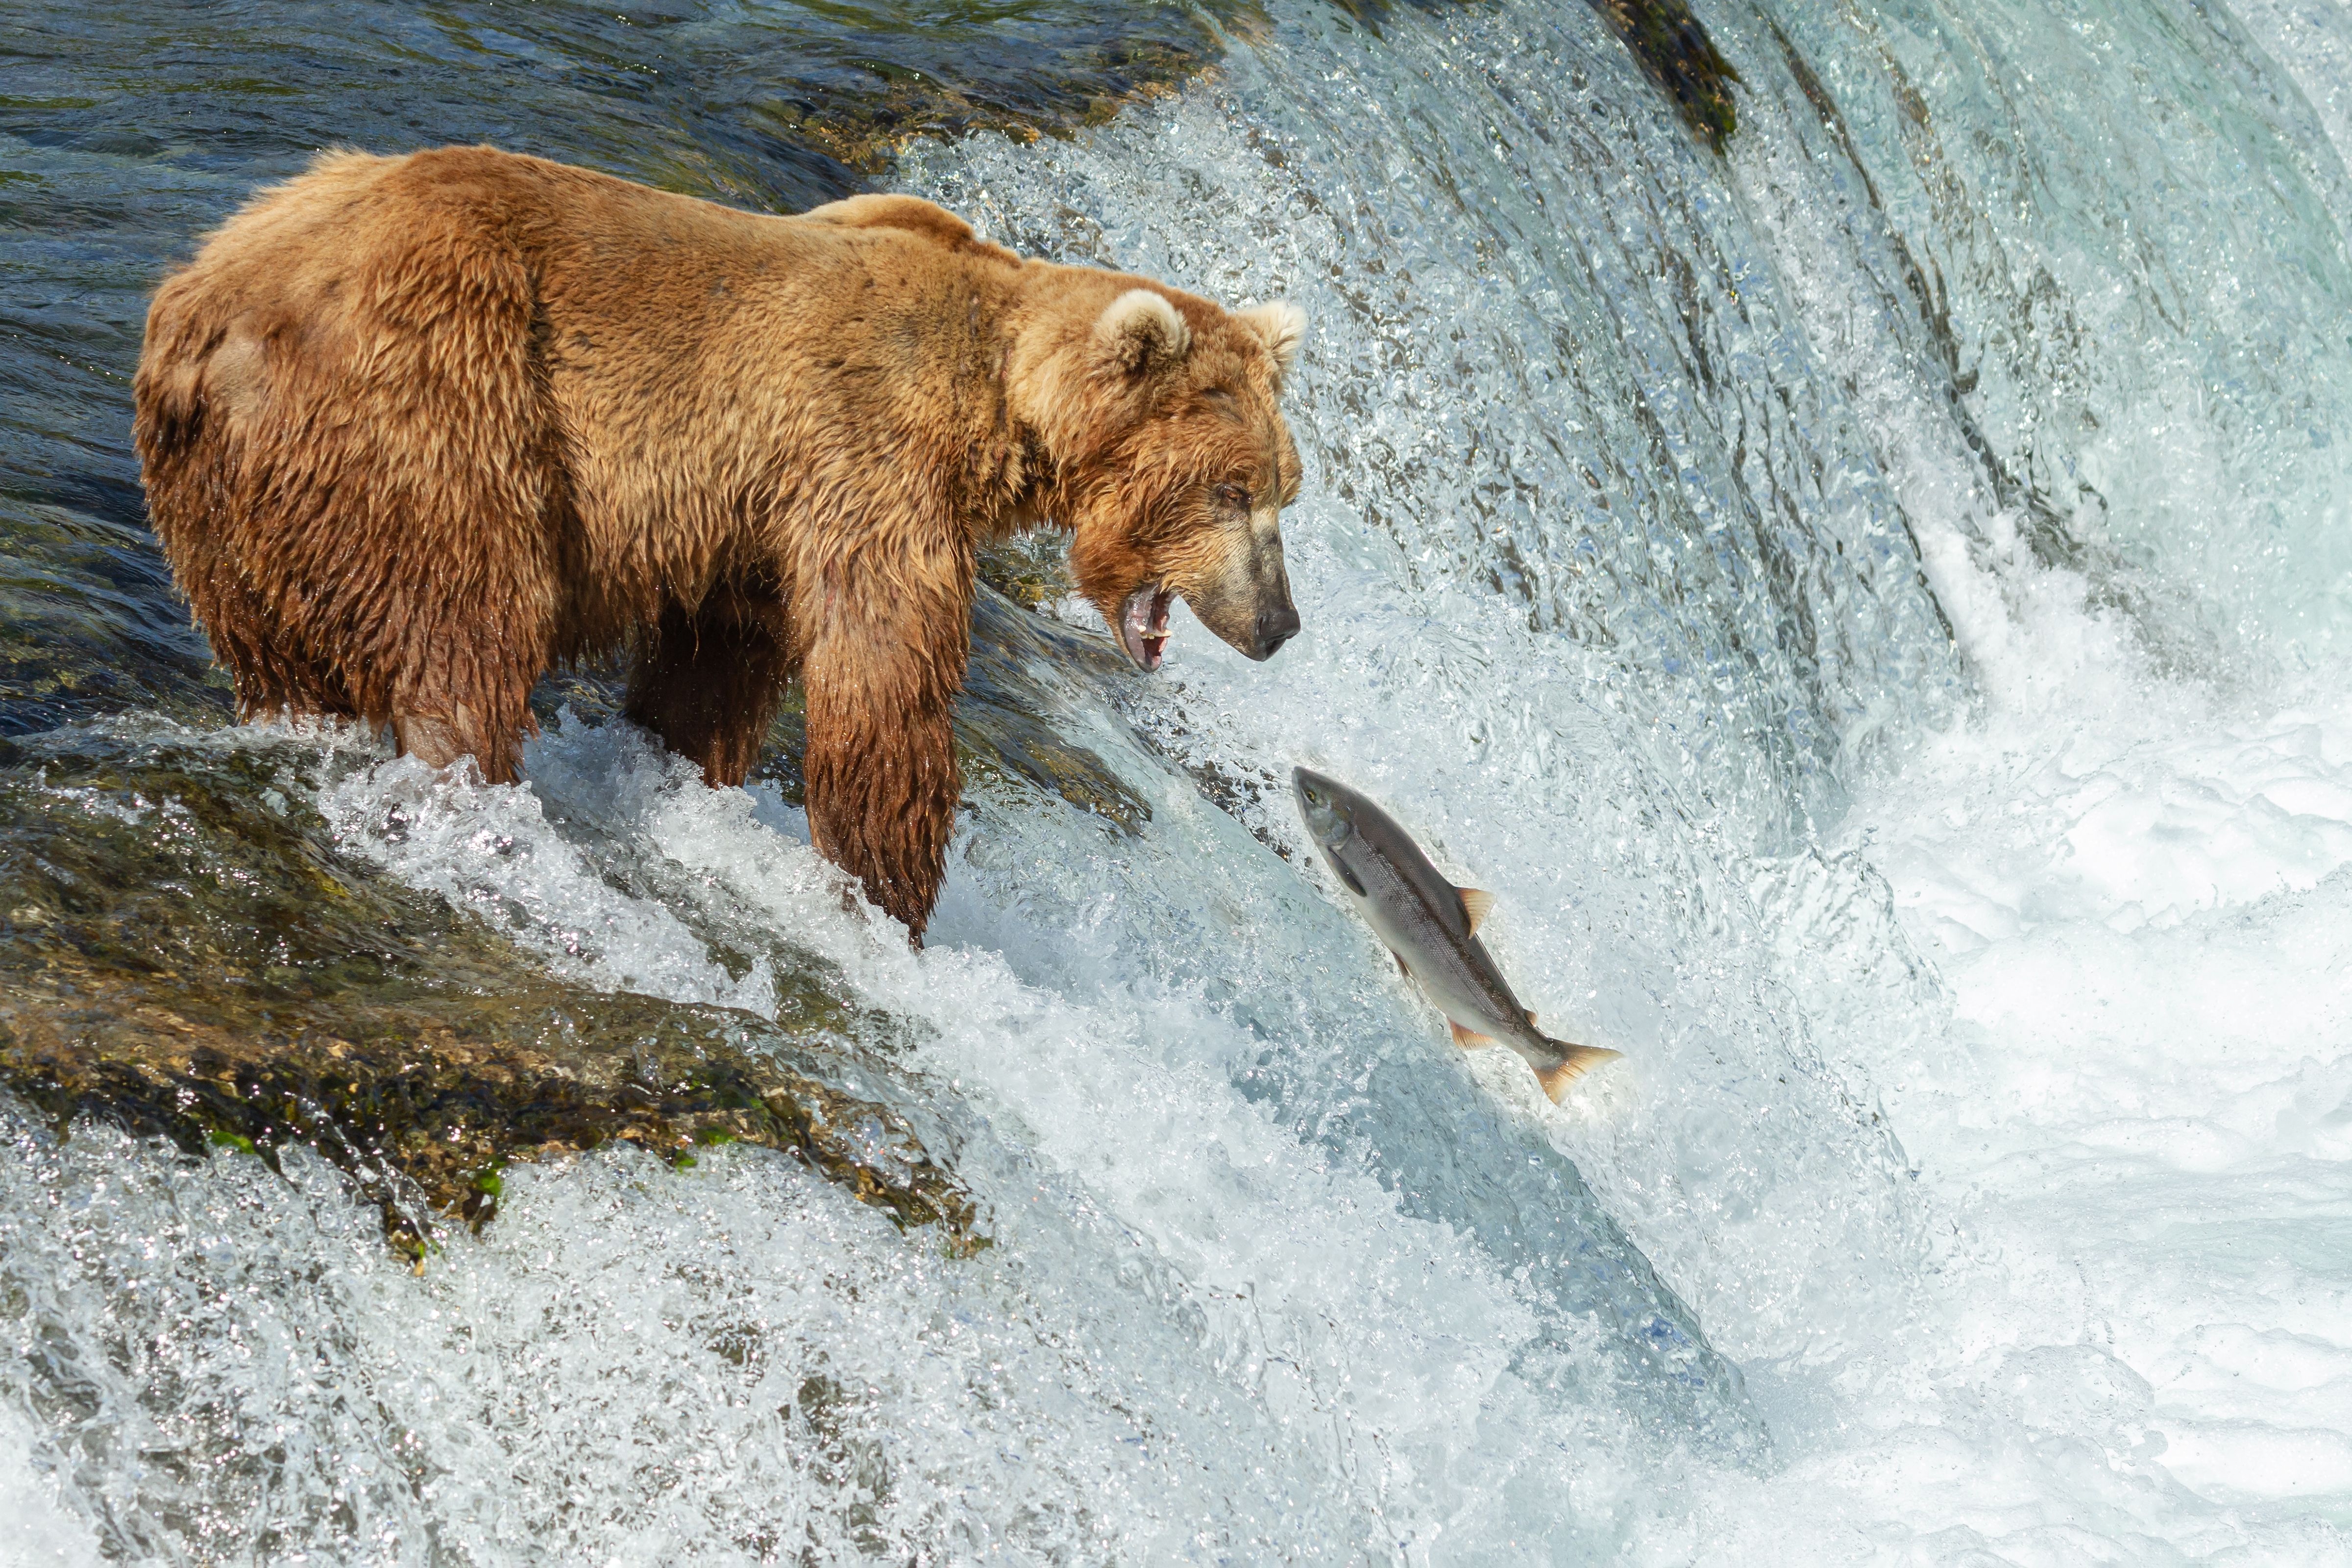 A brown bear stands at the edge of a waterfall, intently watching a salmon leap from the rushing water in Alaska.